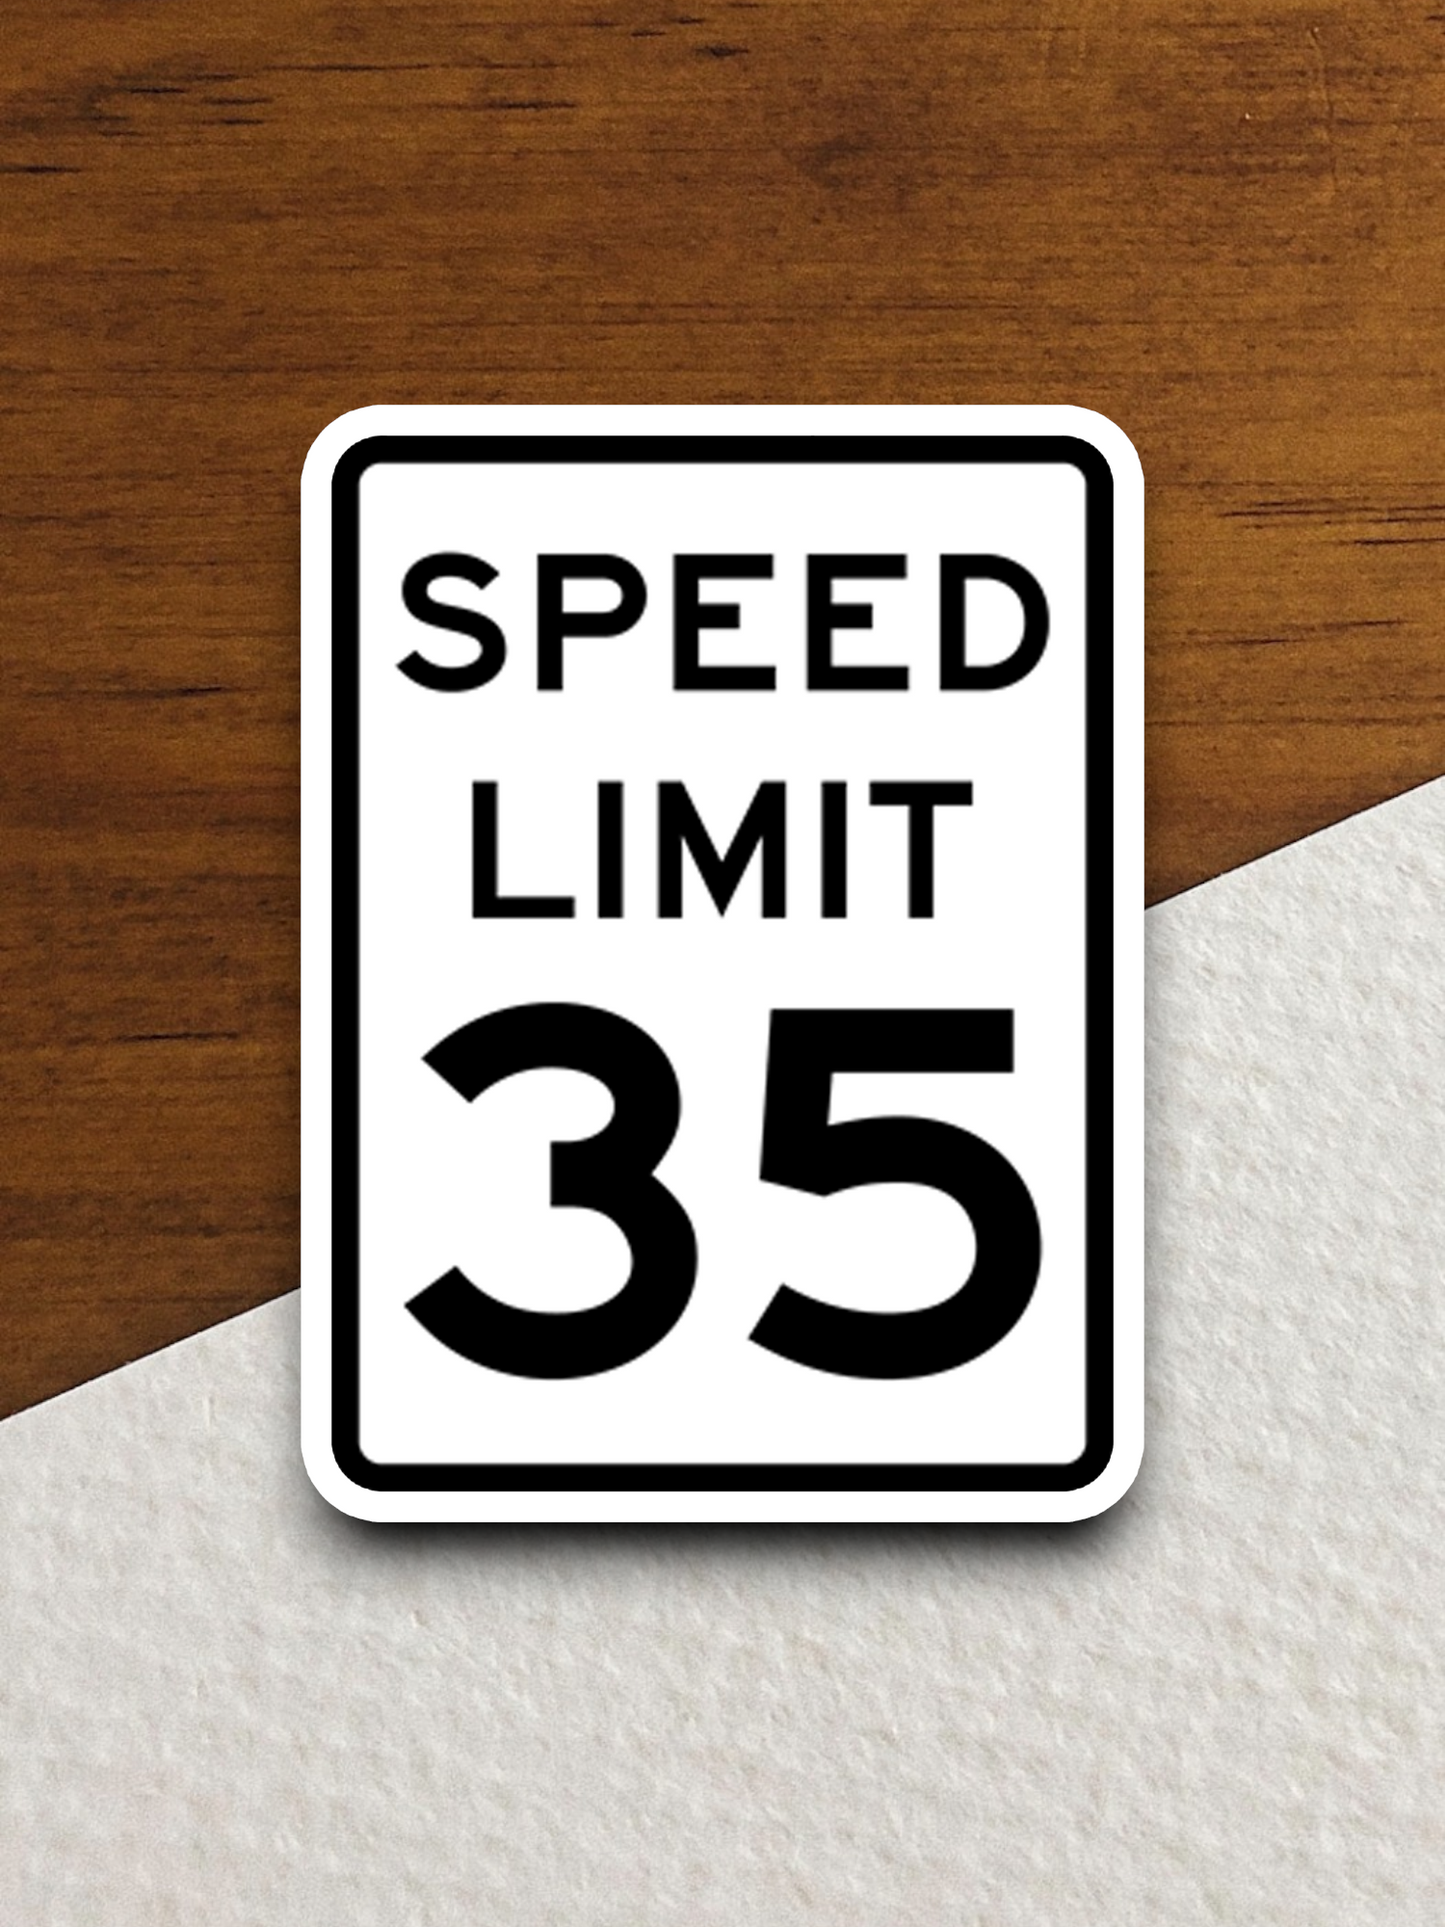 35 Miles Per Hour Speed Limit Road Sign Sticker